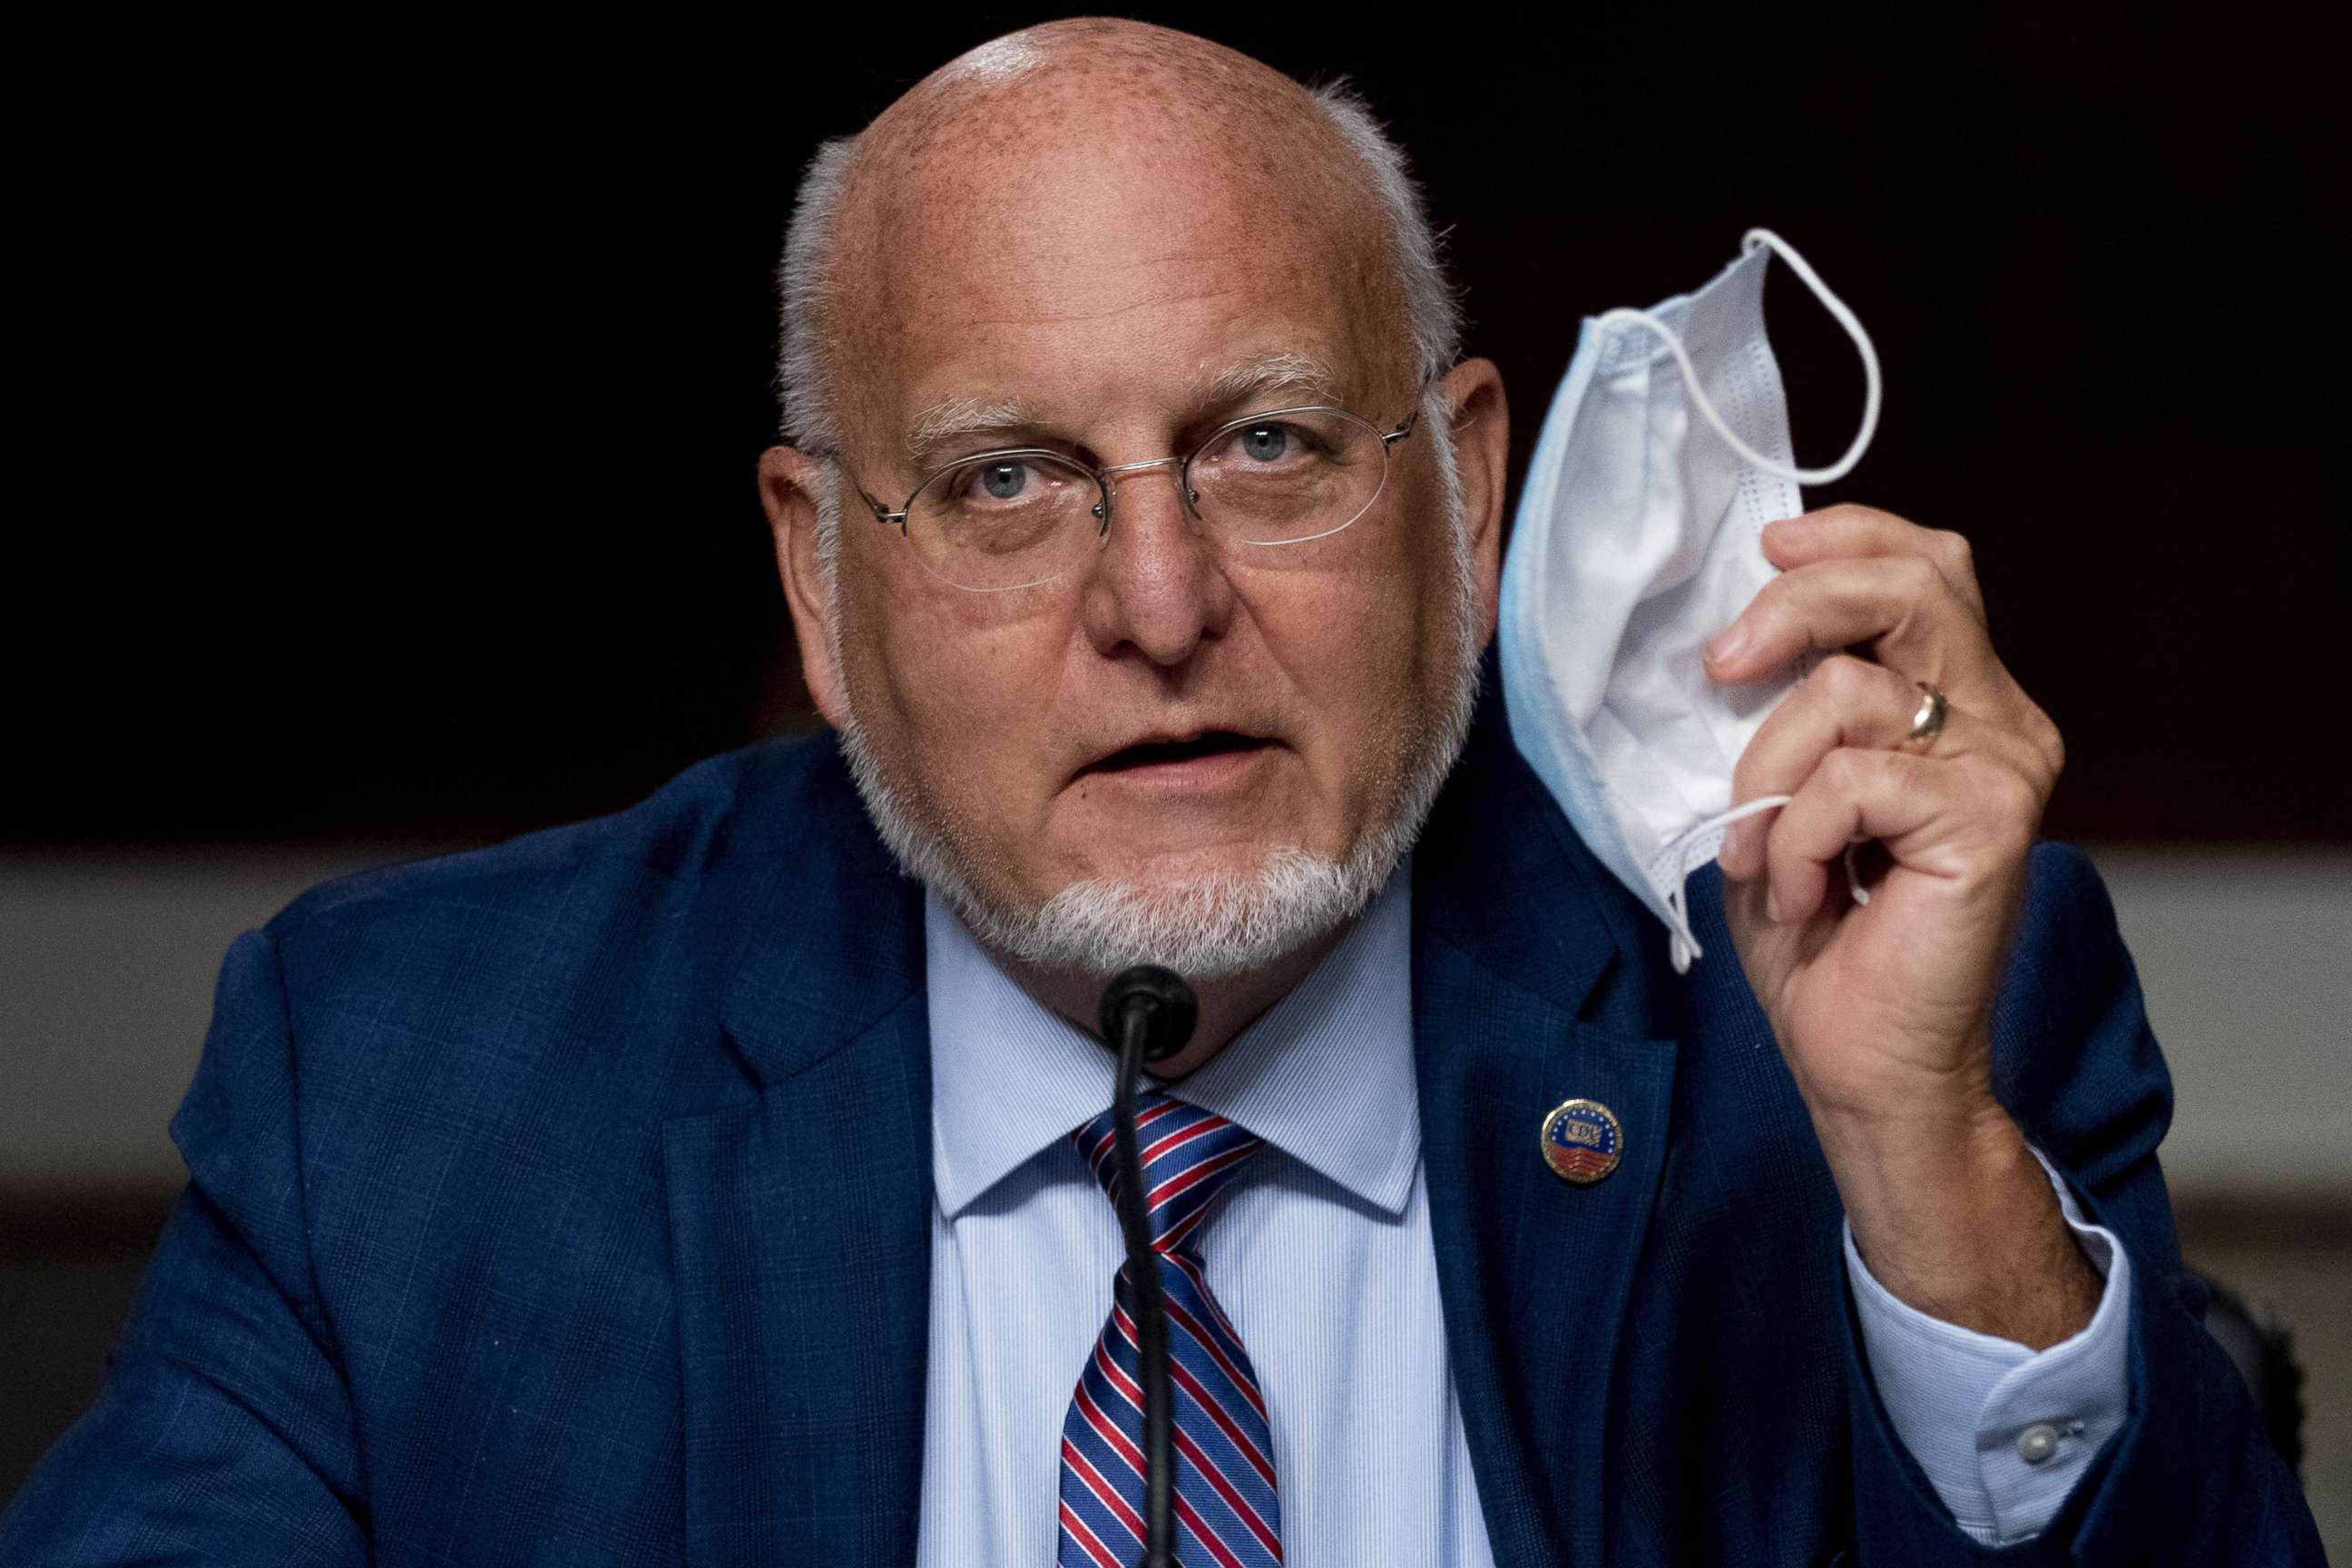 PHOTO: Centers for Disease Control and Prevention Director Dr. Robert Redfield holds up his mask as he speaks at a Senate Appropriations subcommittee hearing on Capitol Hill, Sept. 16, 2020, in Washington.